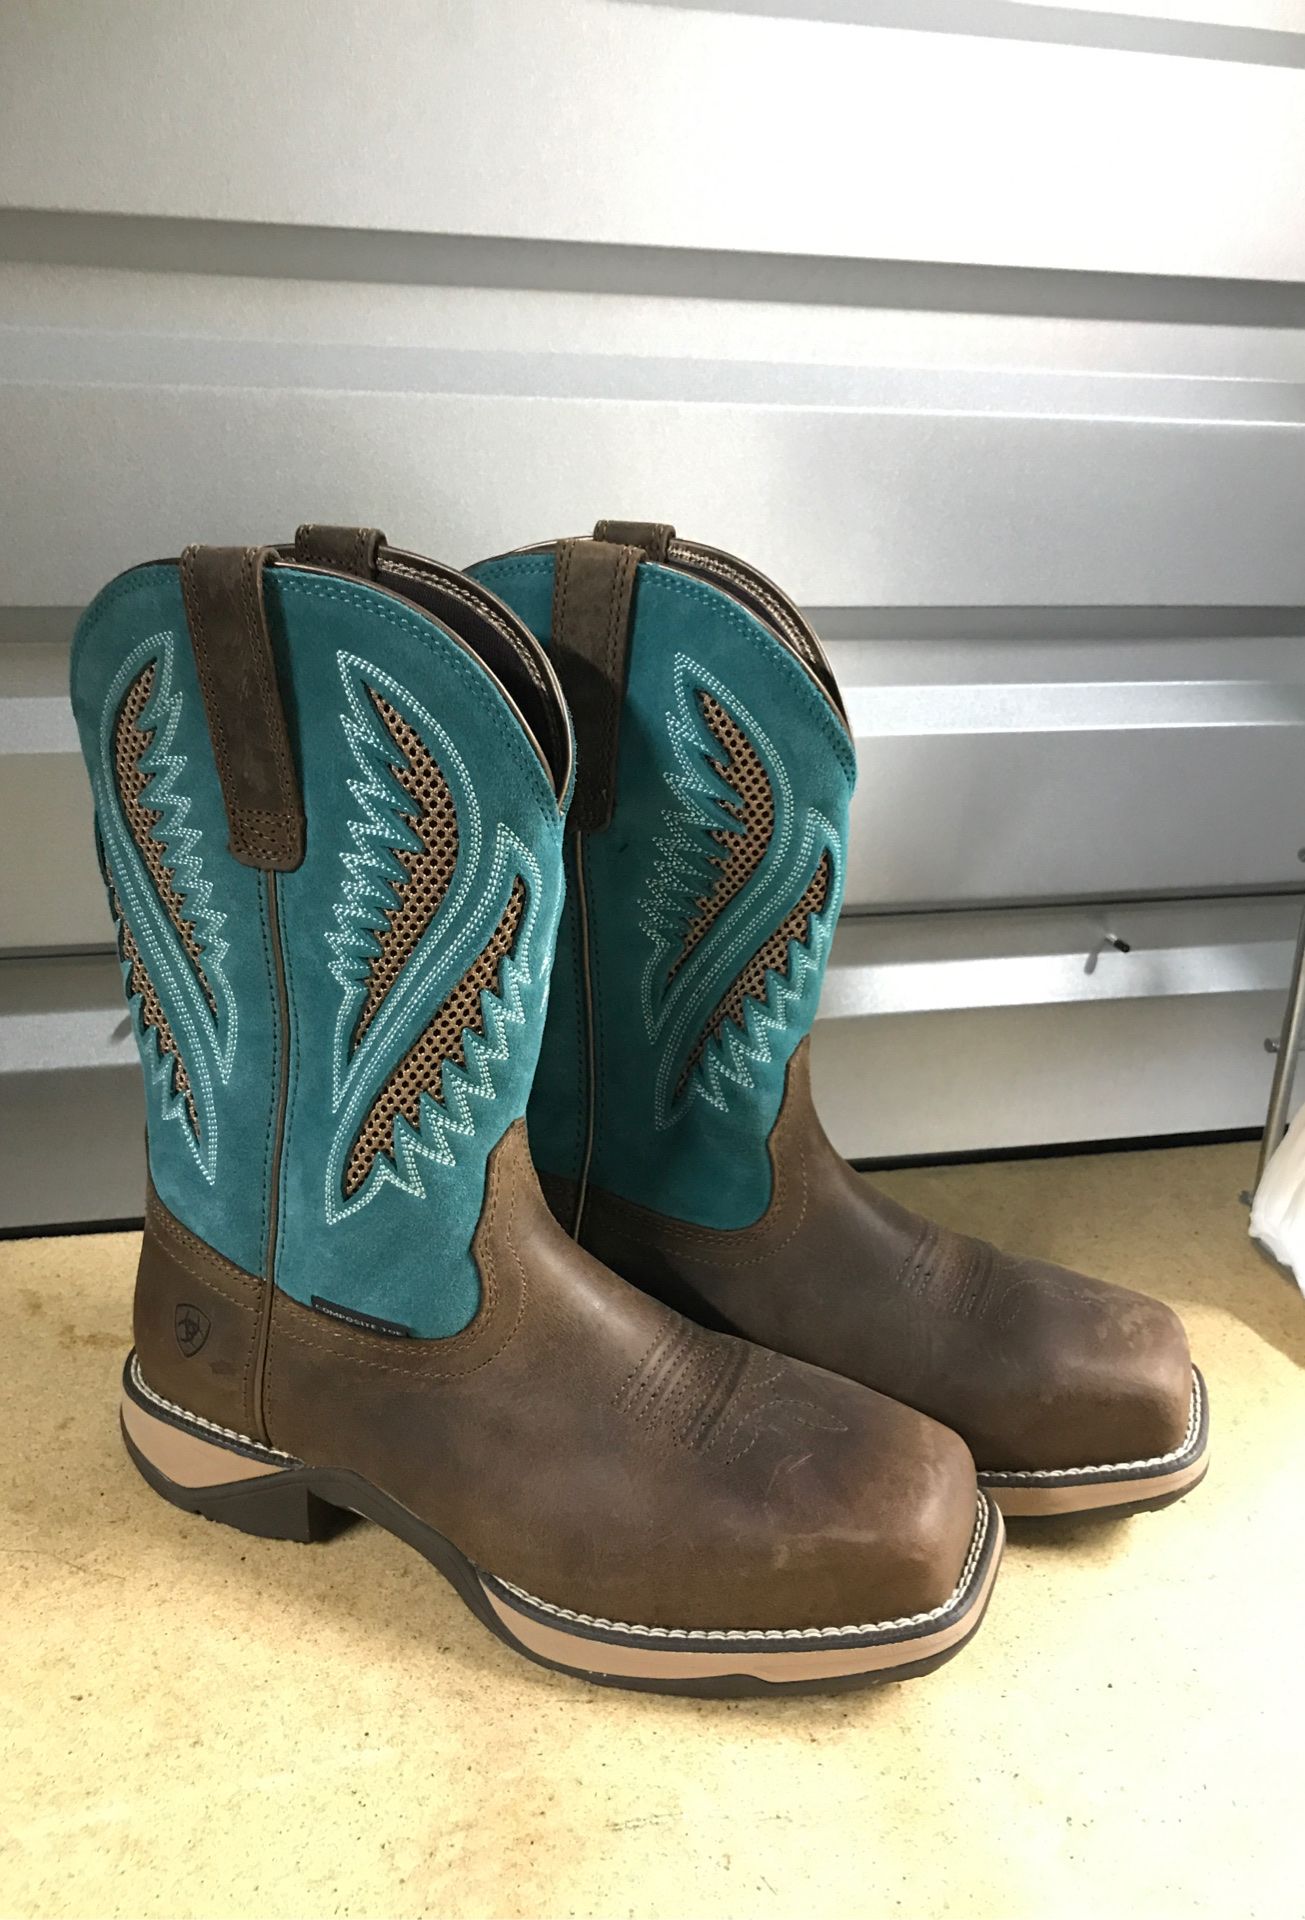 Ariat boots|size 8| work boots